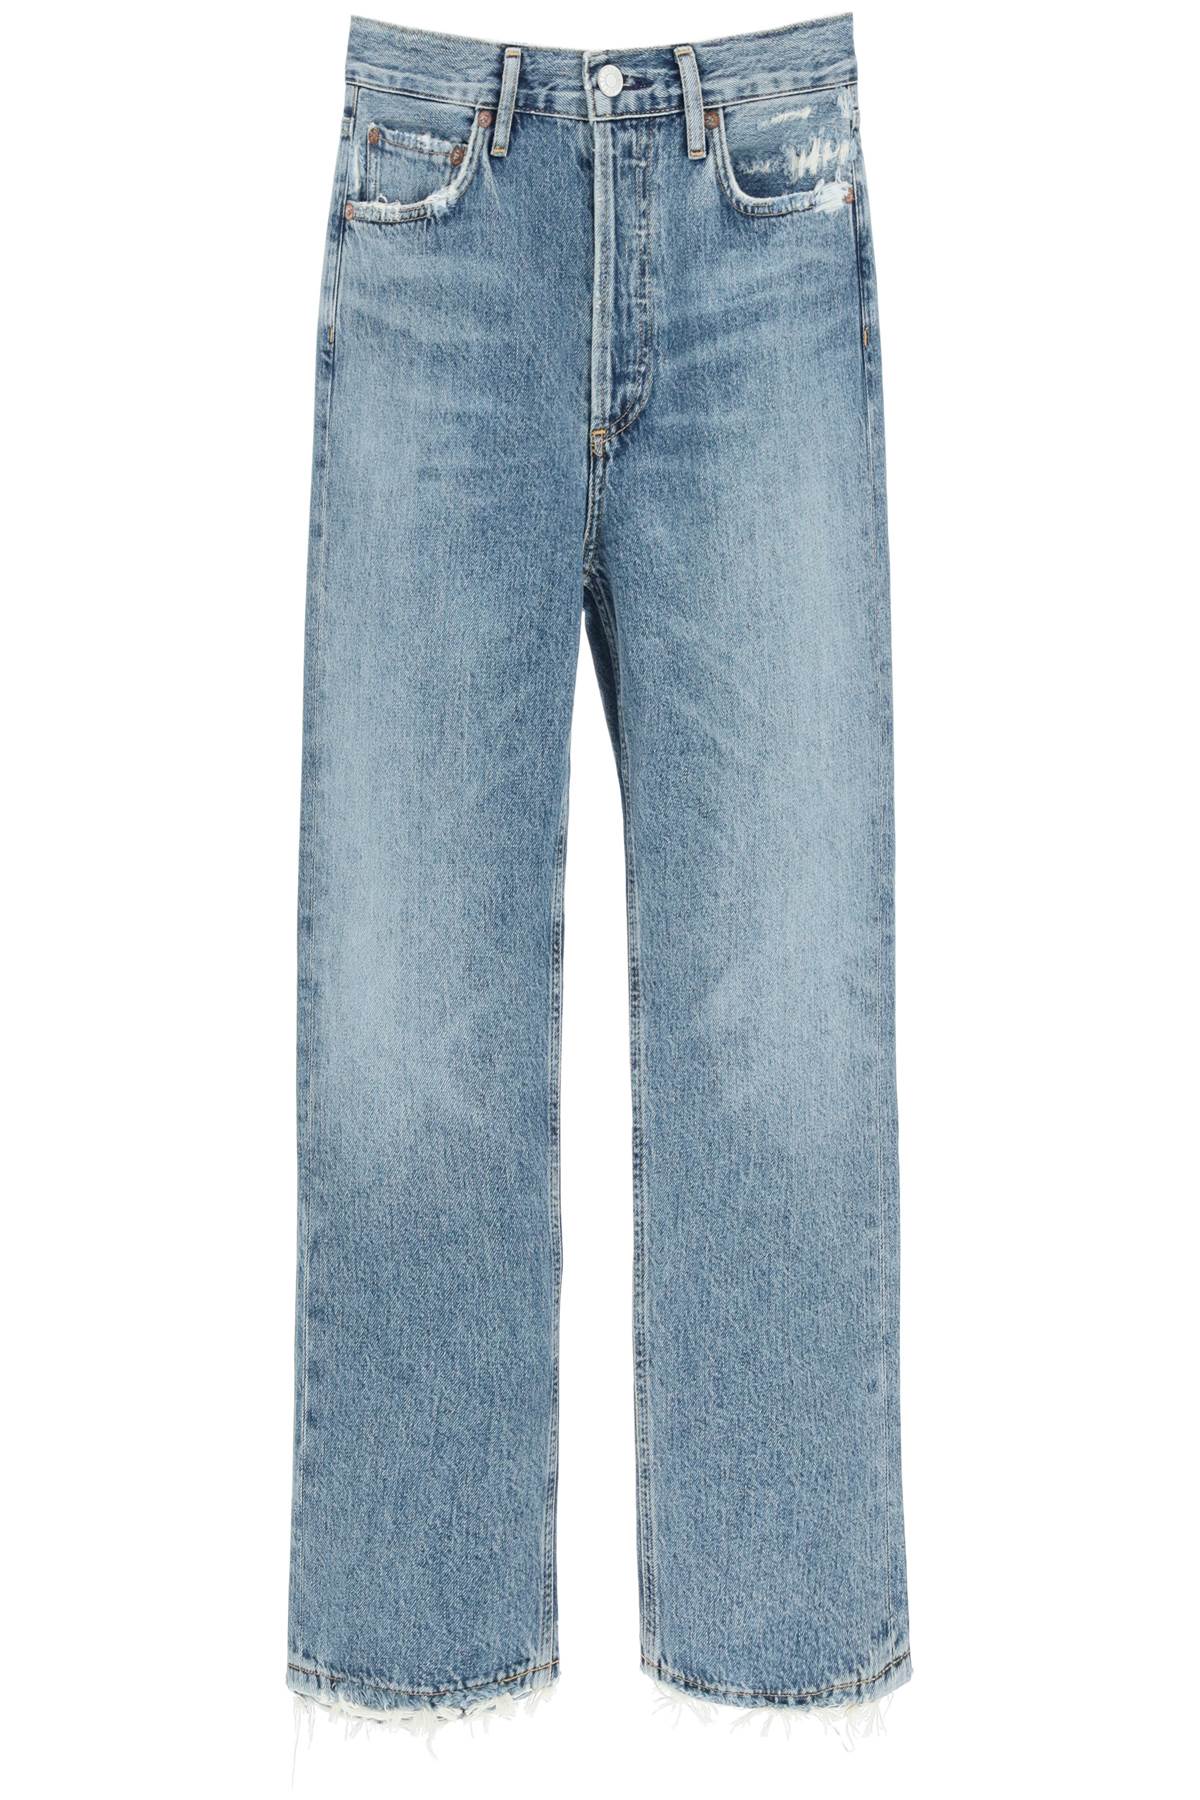 AGOLDE riley Cropped Jeans